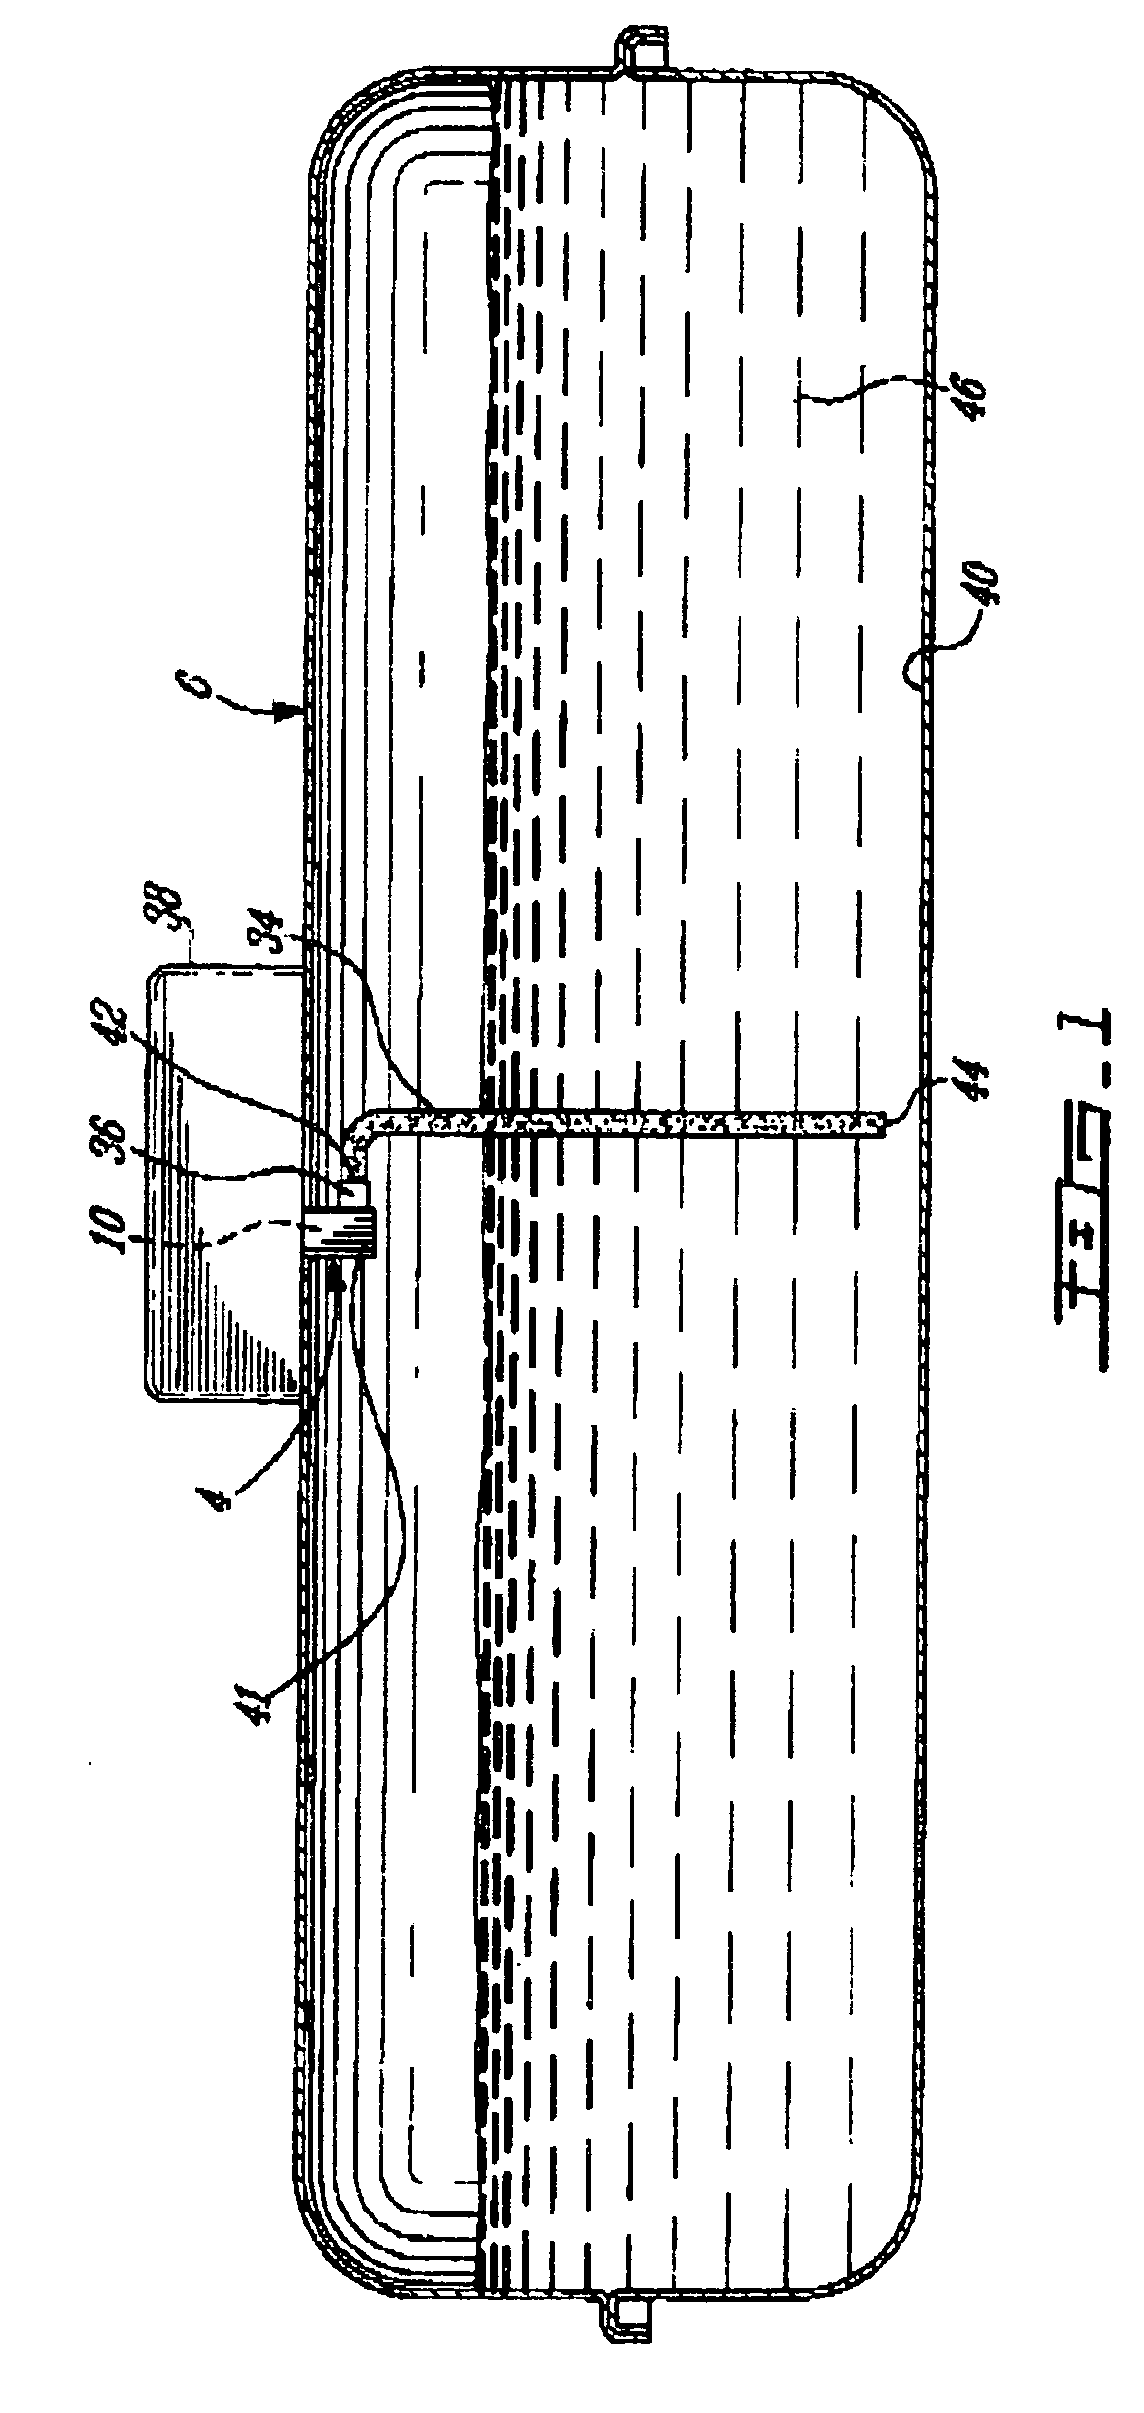 Method and system for measuring fluid level in a container